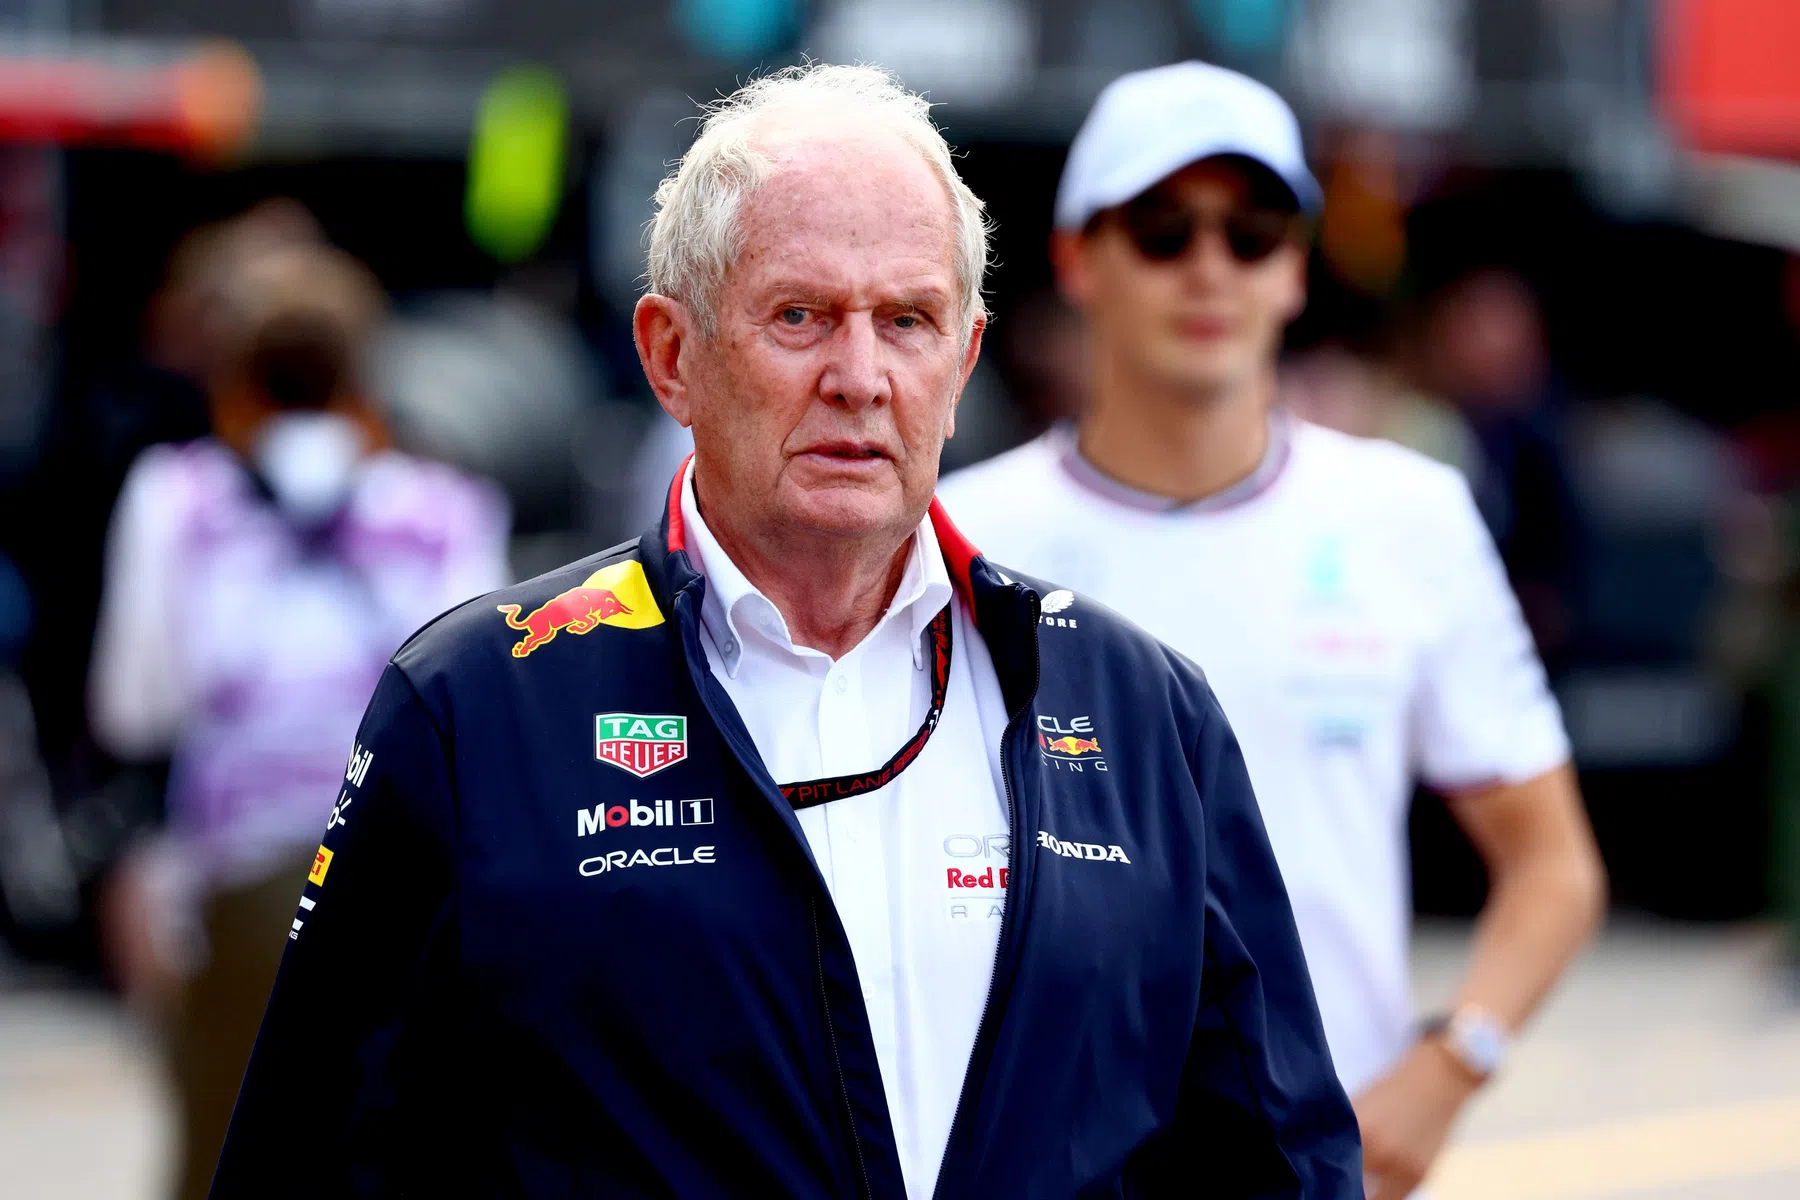 Why Verstappen did a test in Imola according to Helmut Marko